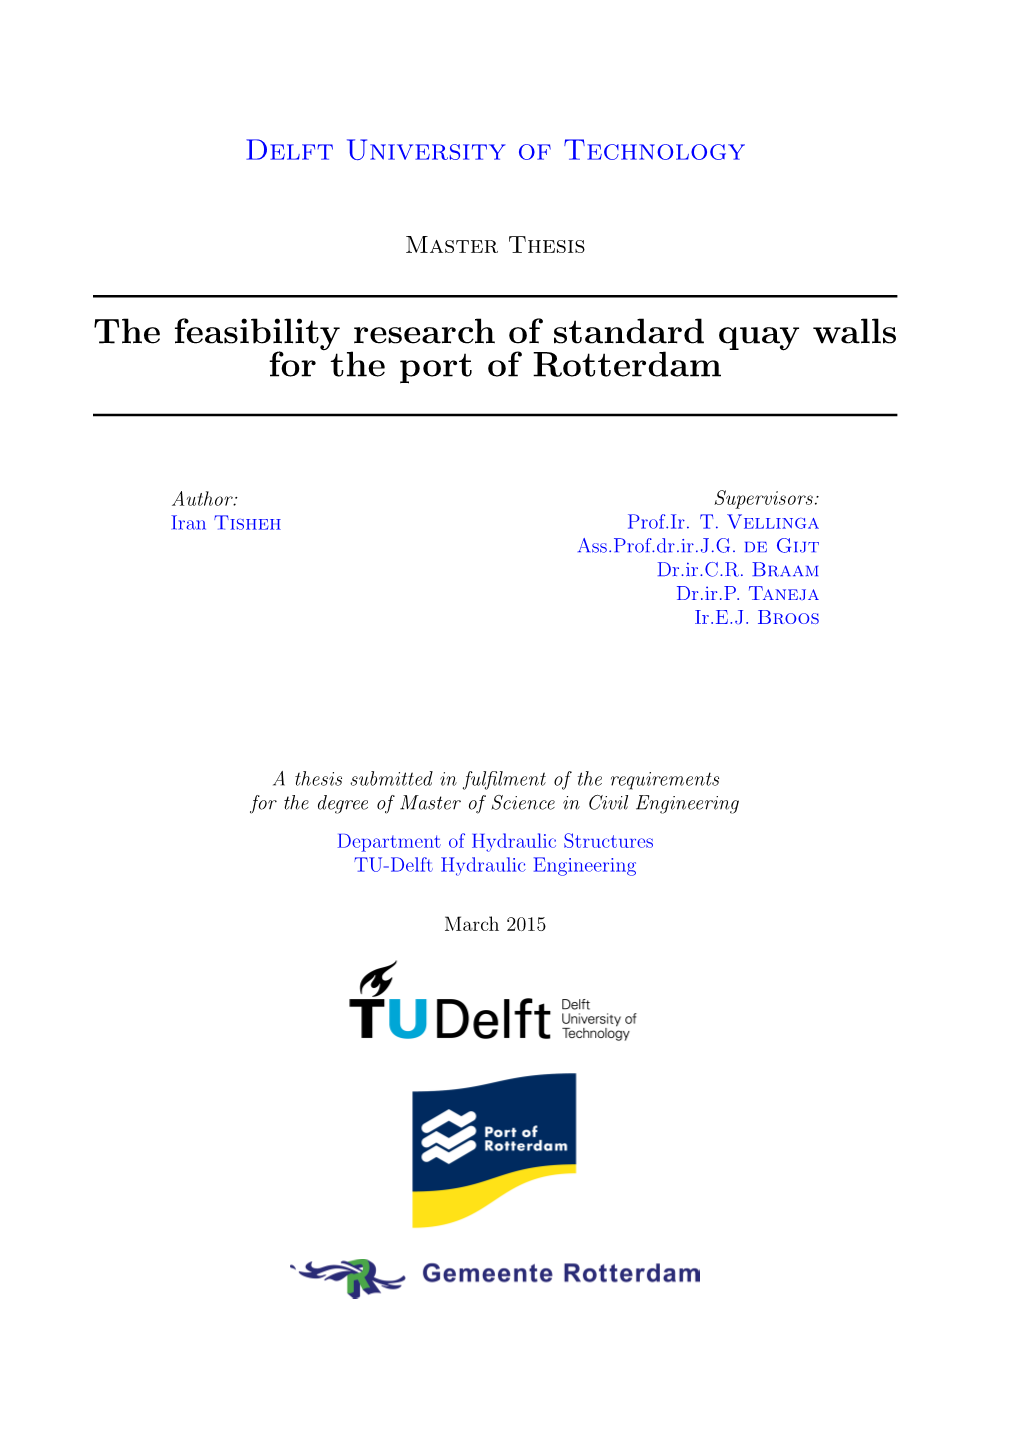 The Feasibility Research of Standard Quay Walls for the Port of Rotterdam